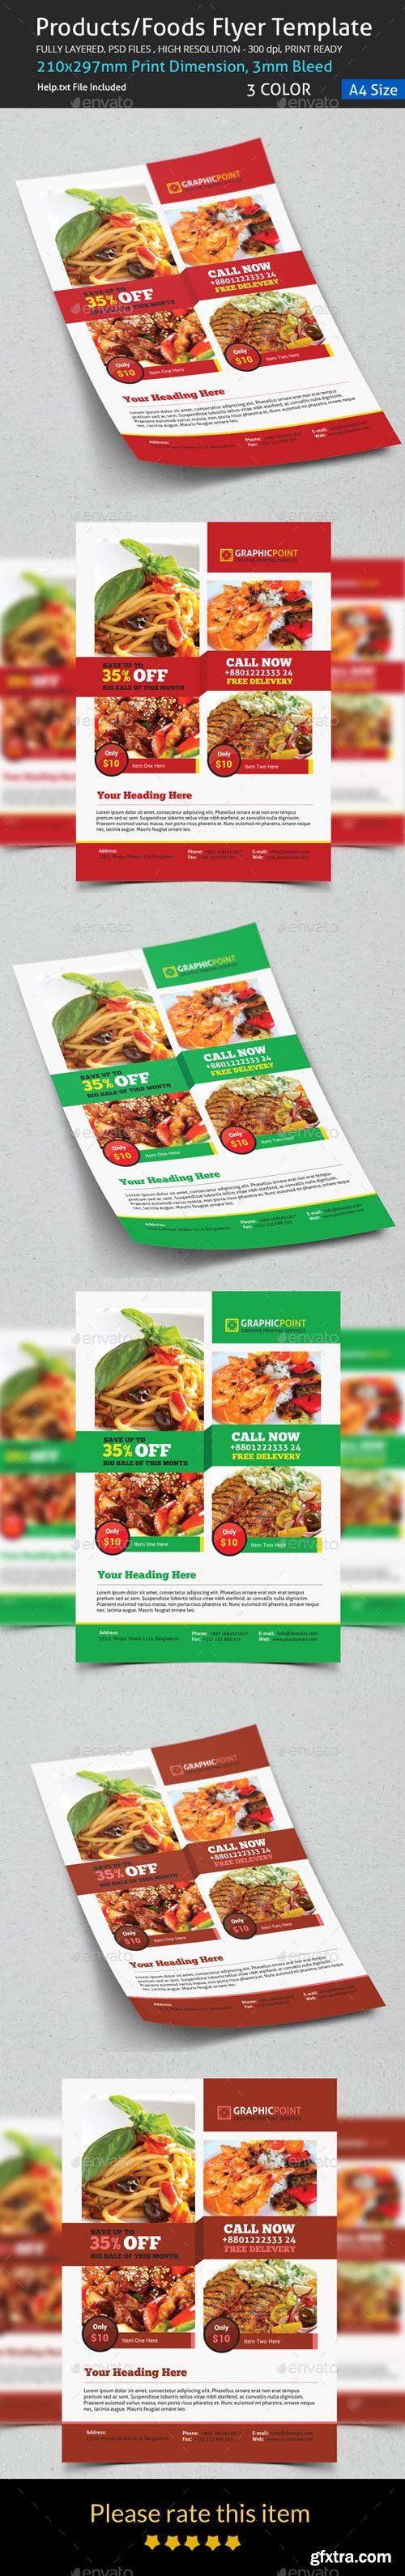 GraphicRiver - Products/Foods Flyer Template - 8877034